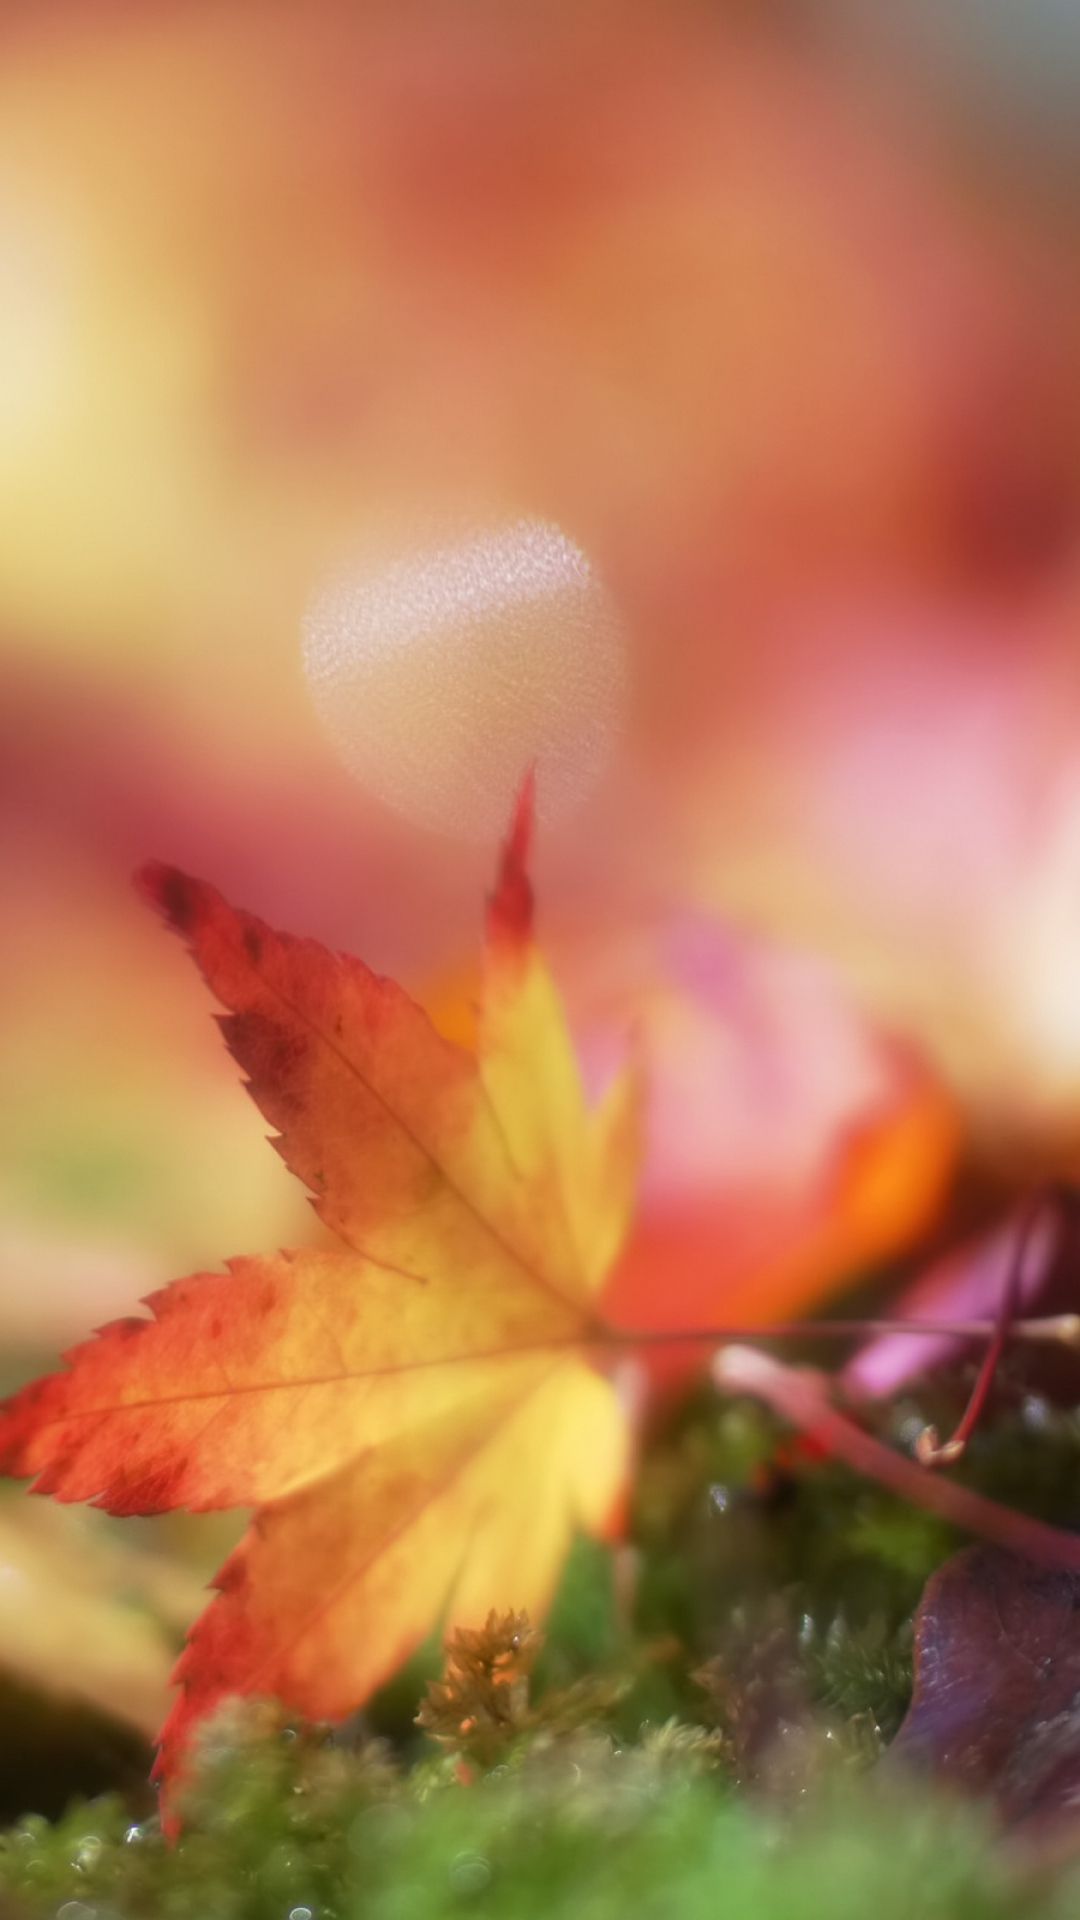 Bokeh Autumn Maple Leaf Android Wallpaper free download